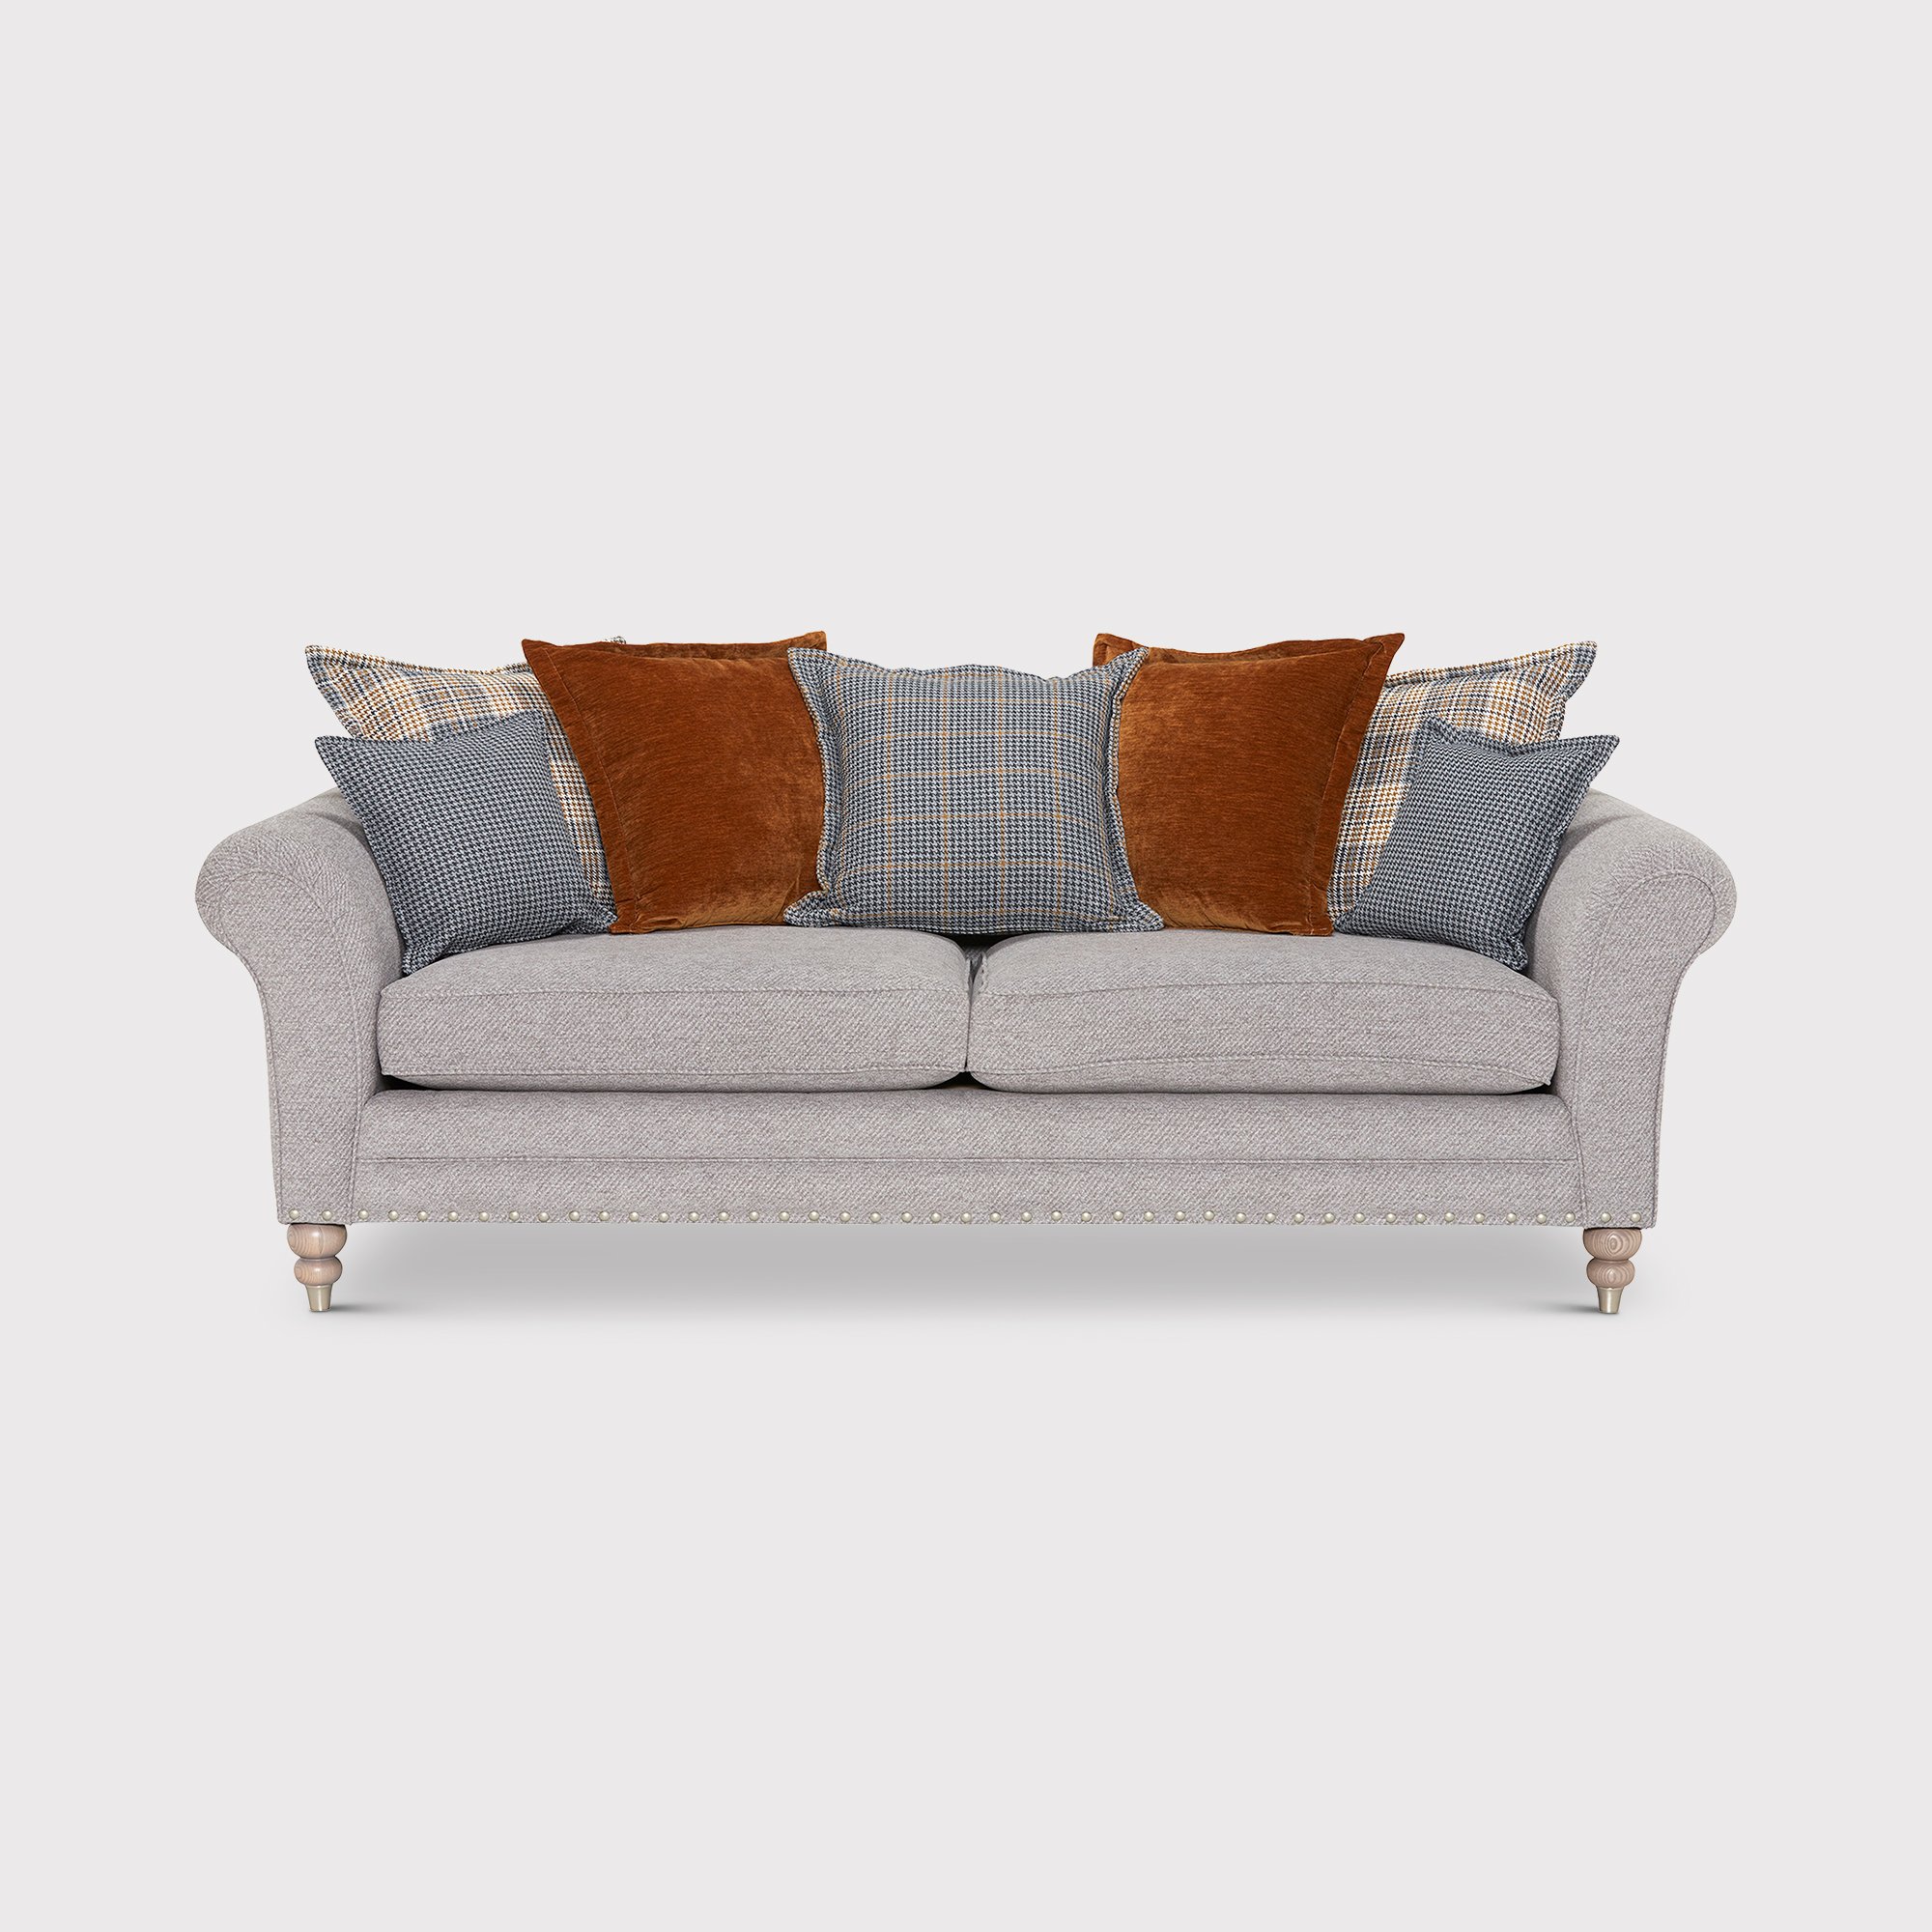 Bedale Grand Sofa Pillow Back, Neutral | Barker & Stonehouse